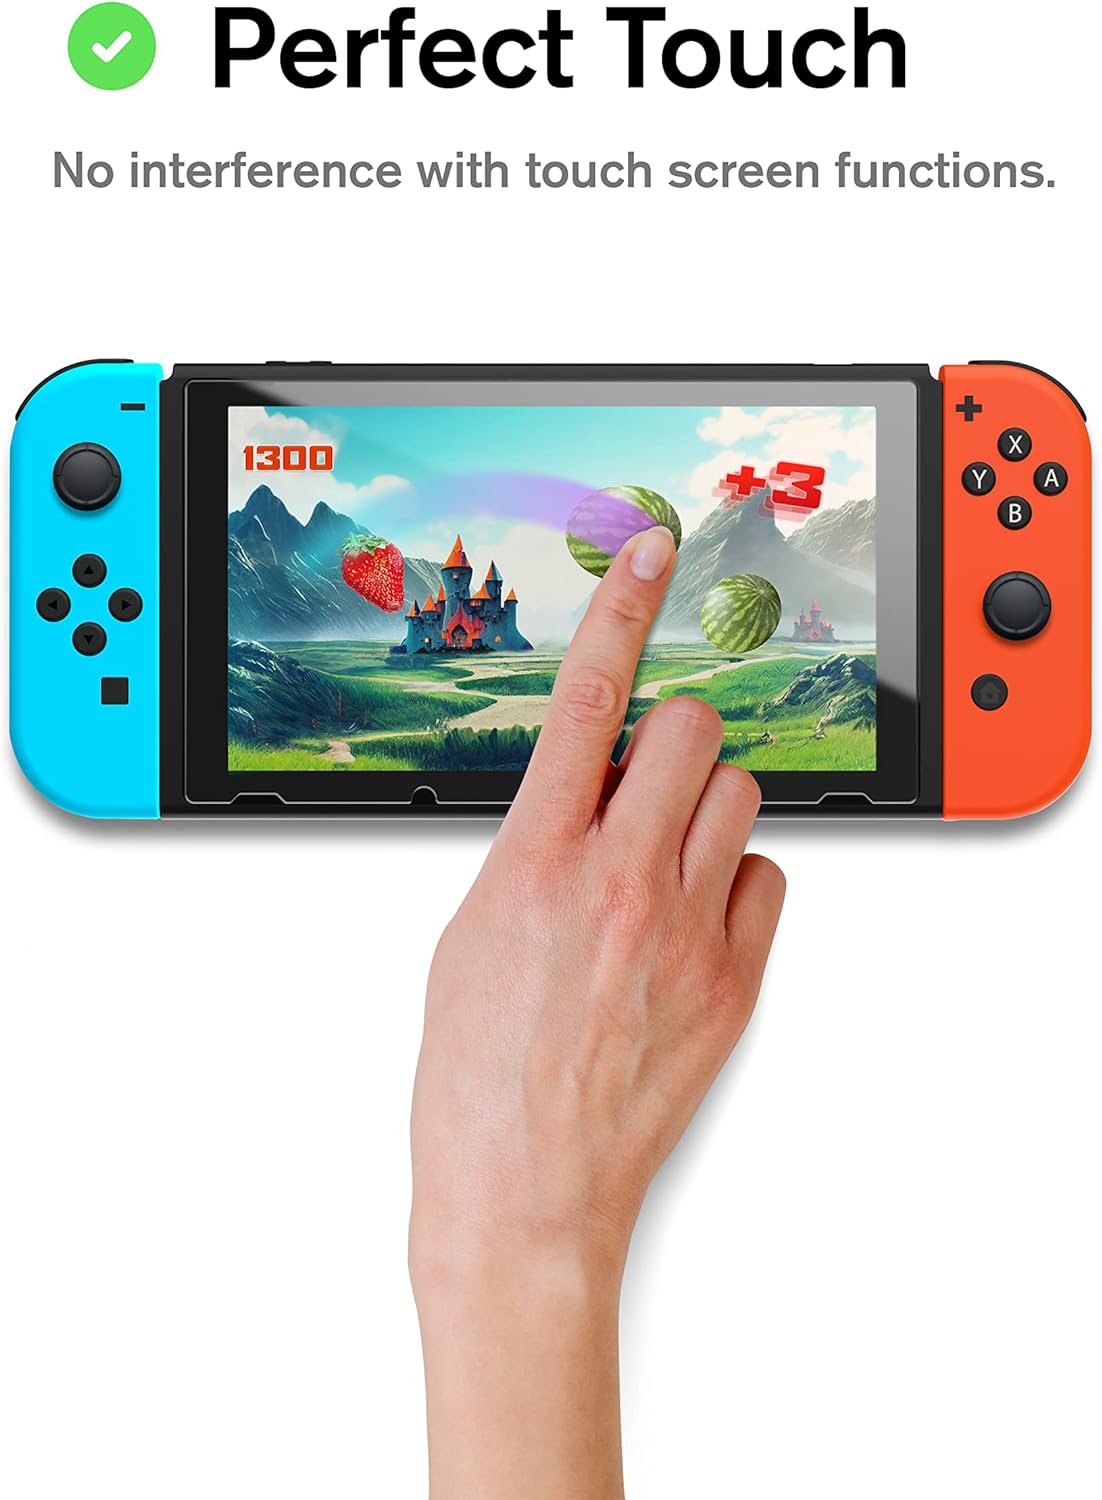 Nyko | Screen Armor - Screen Protector with Rounded Edges for Nintendo Switch